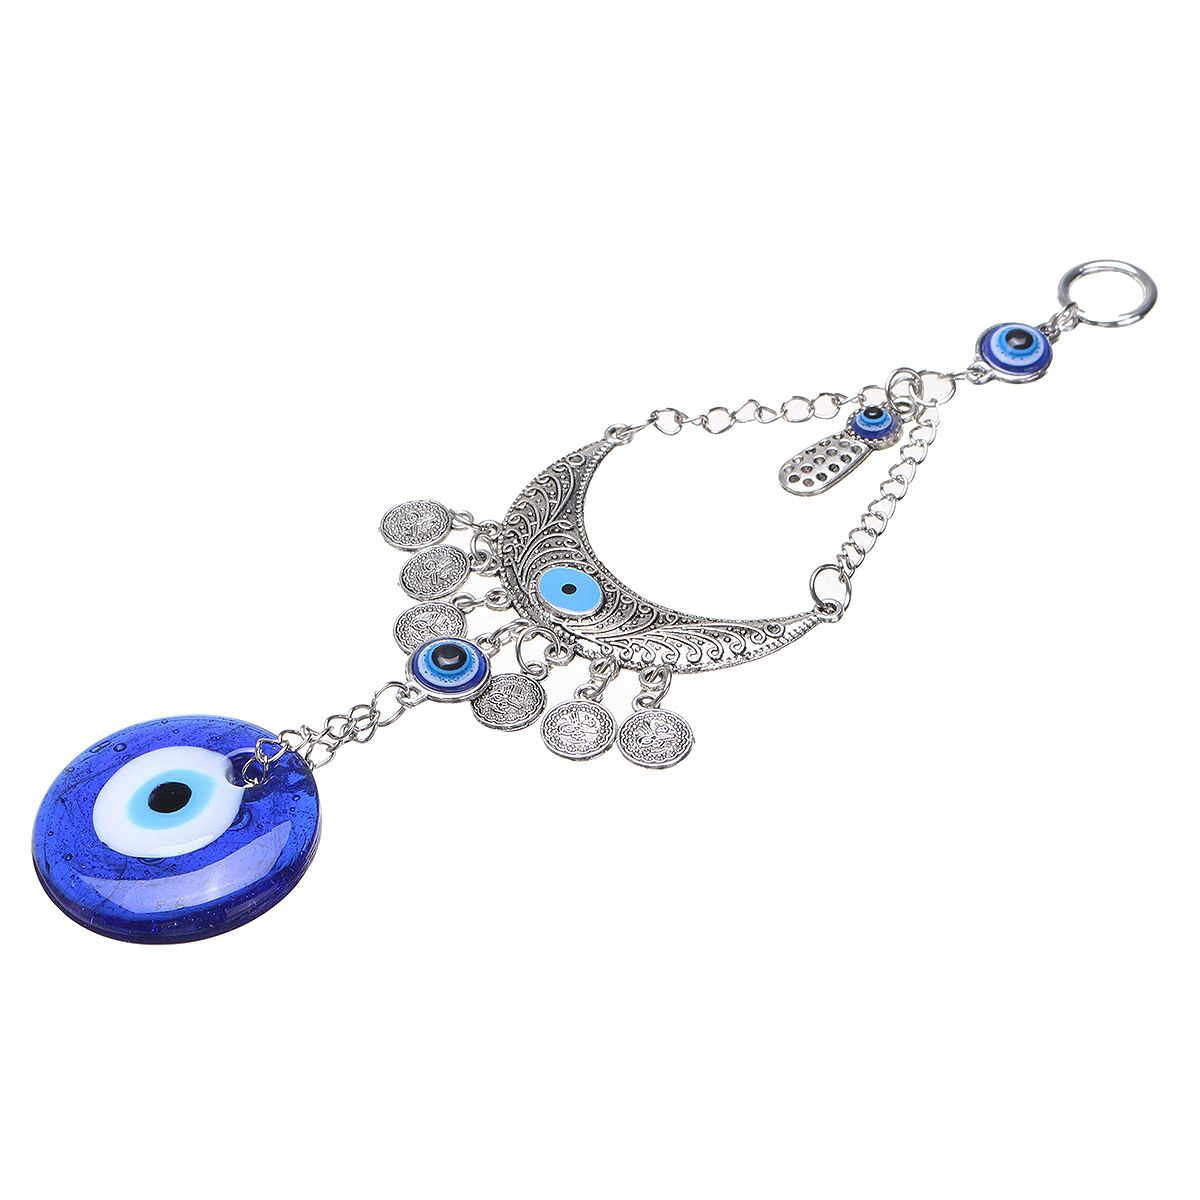 Turkish-Blue-Glass-Evil-Eye-Amulet-Wall-Hanging-Pendants-Home-Decorations-Lucky-Protection-1499024